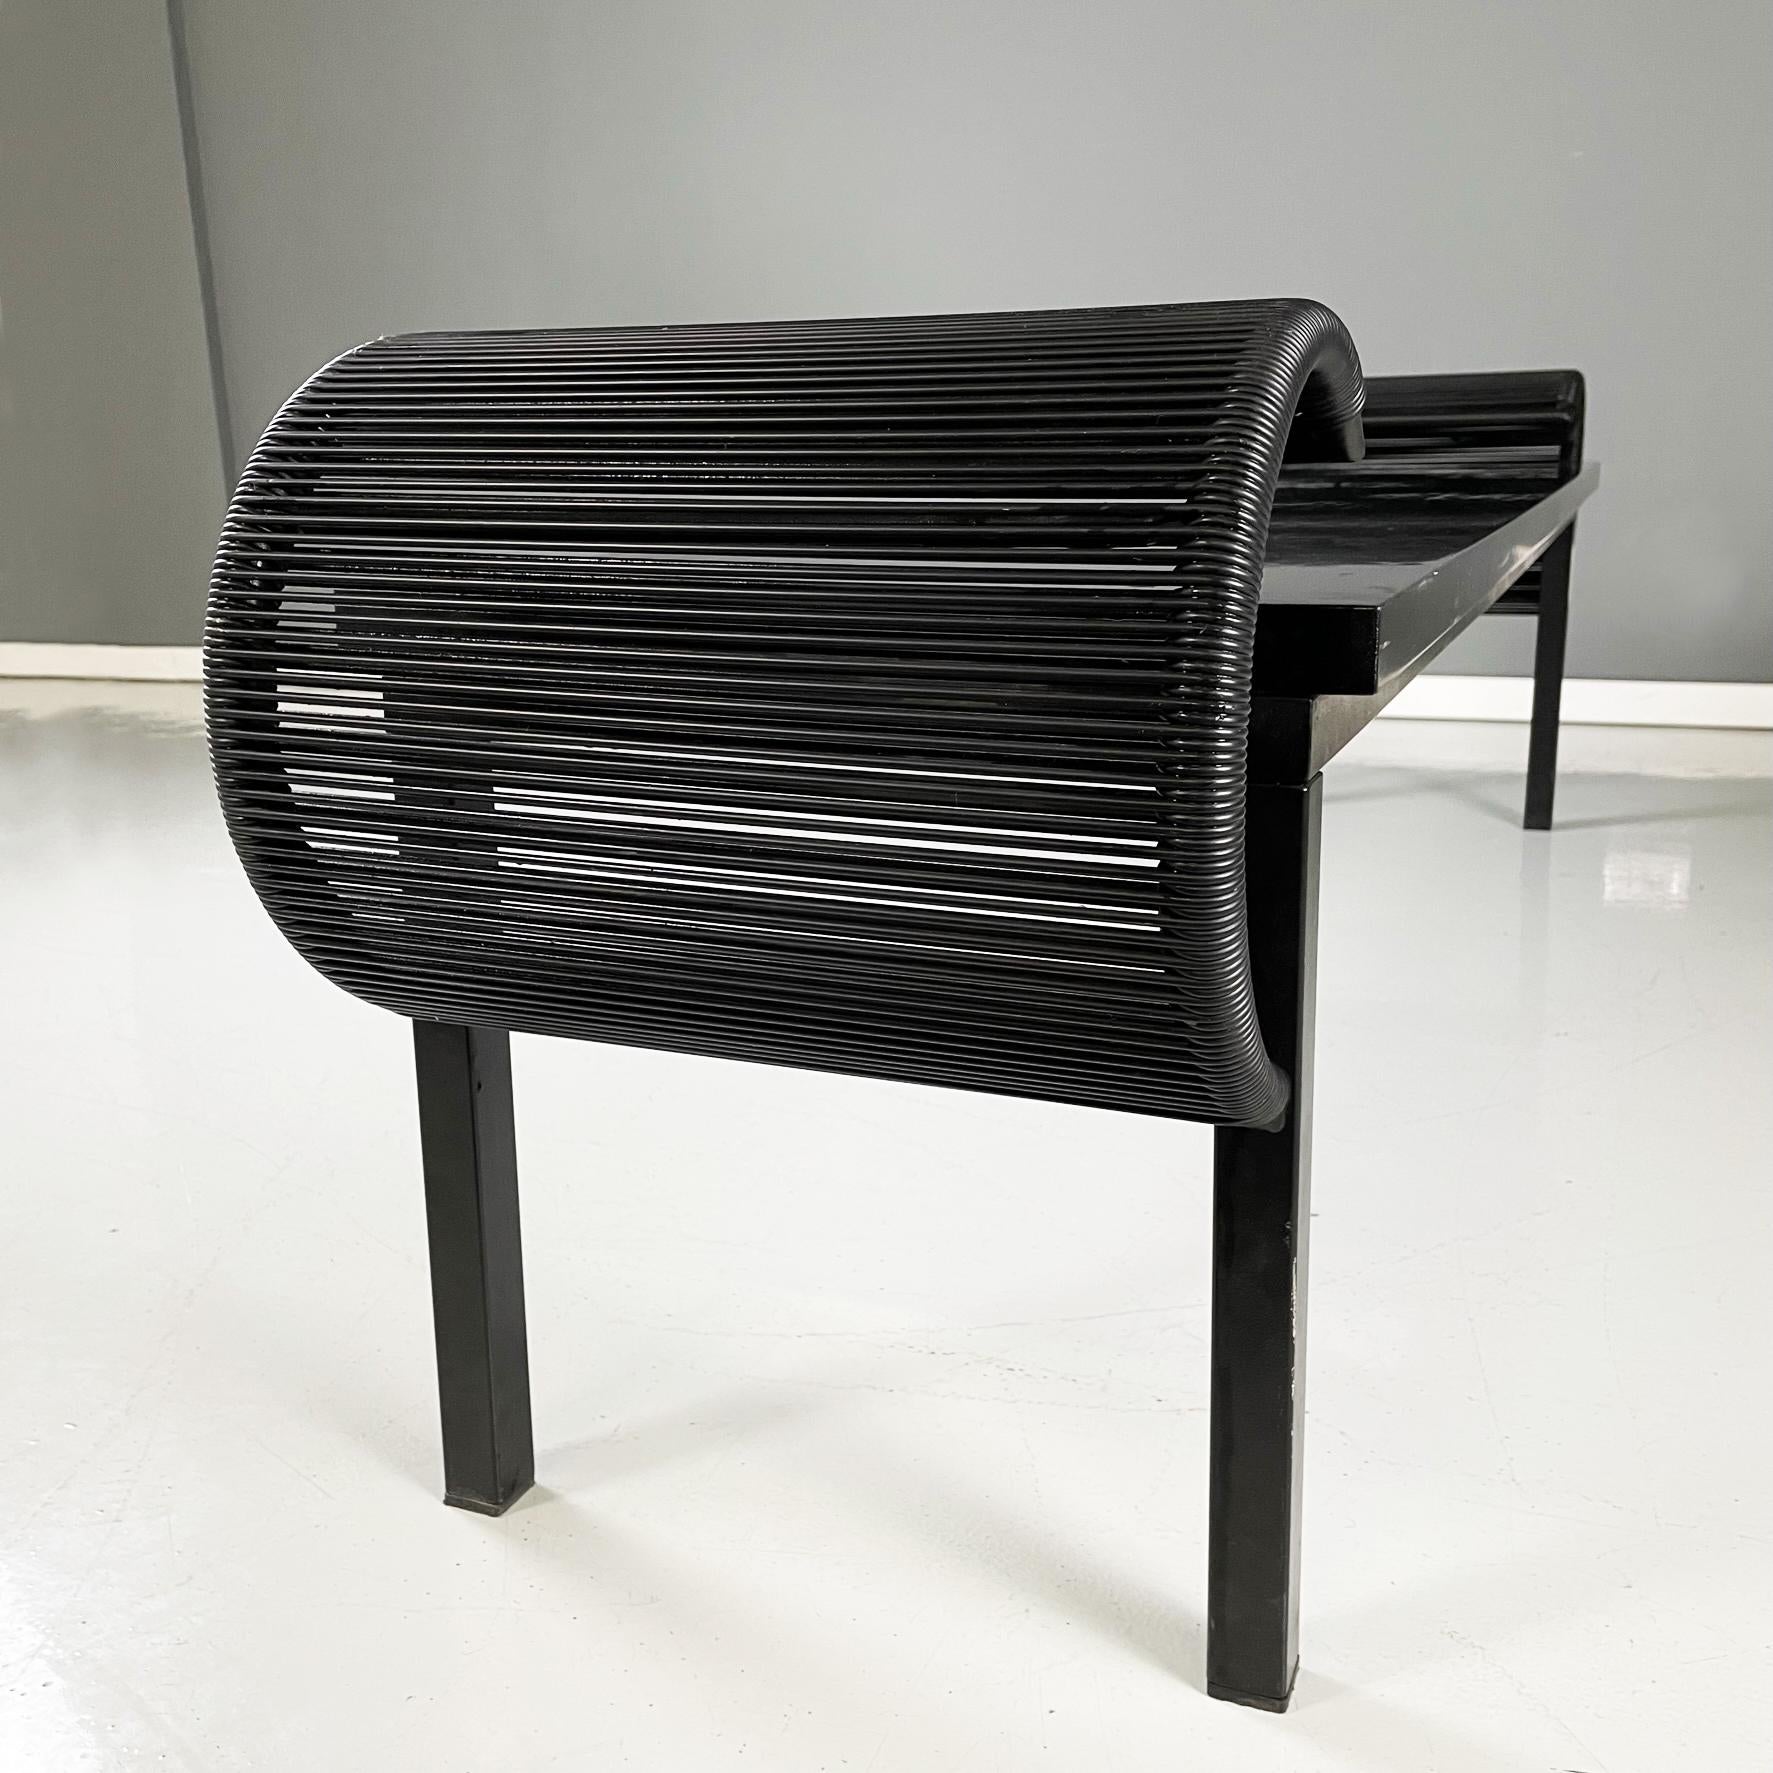 Metal Italian post-modern Black wood, metal and plastic bench by Nanni Fly Line, 1990s For Sale